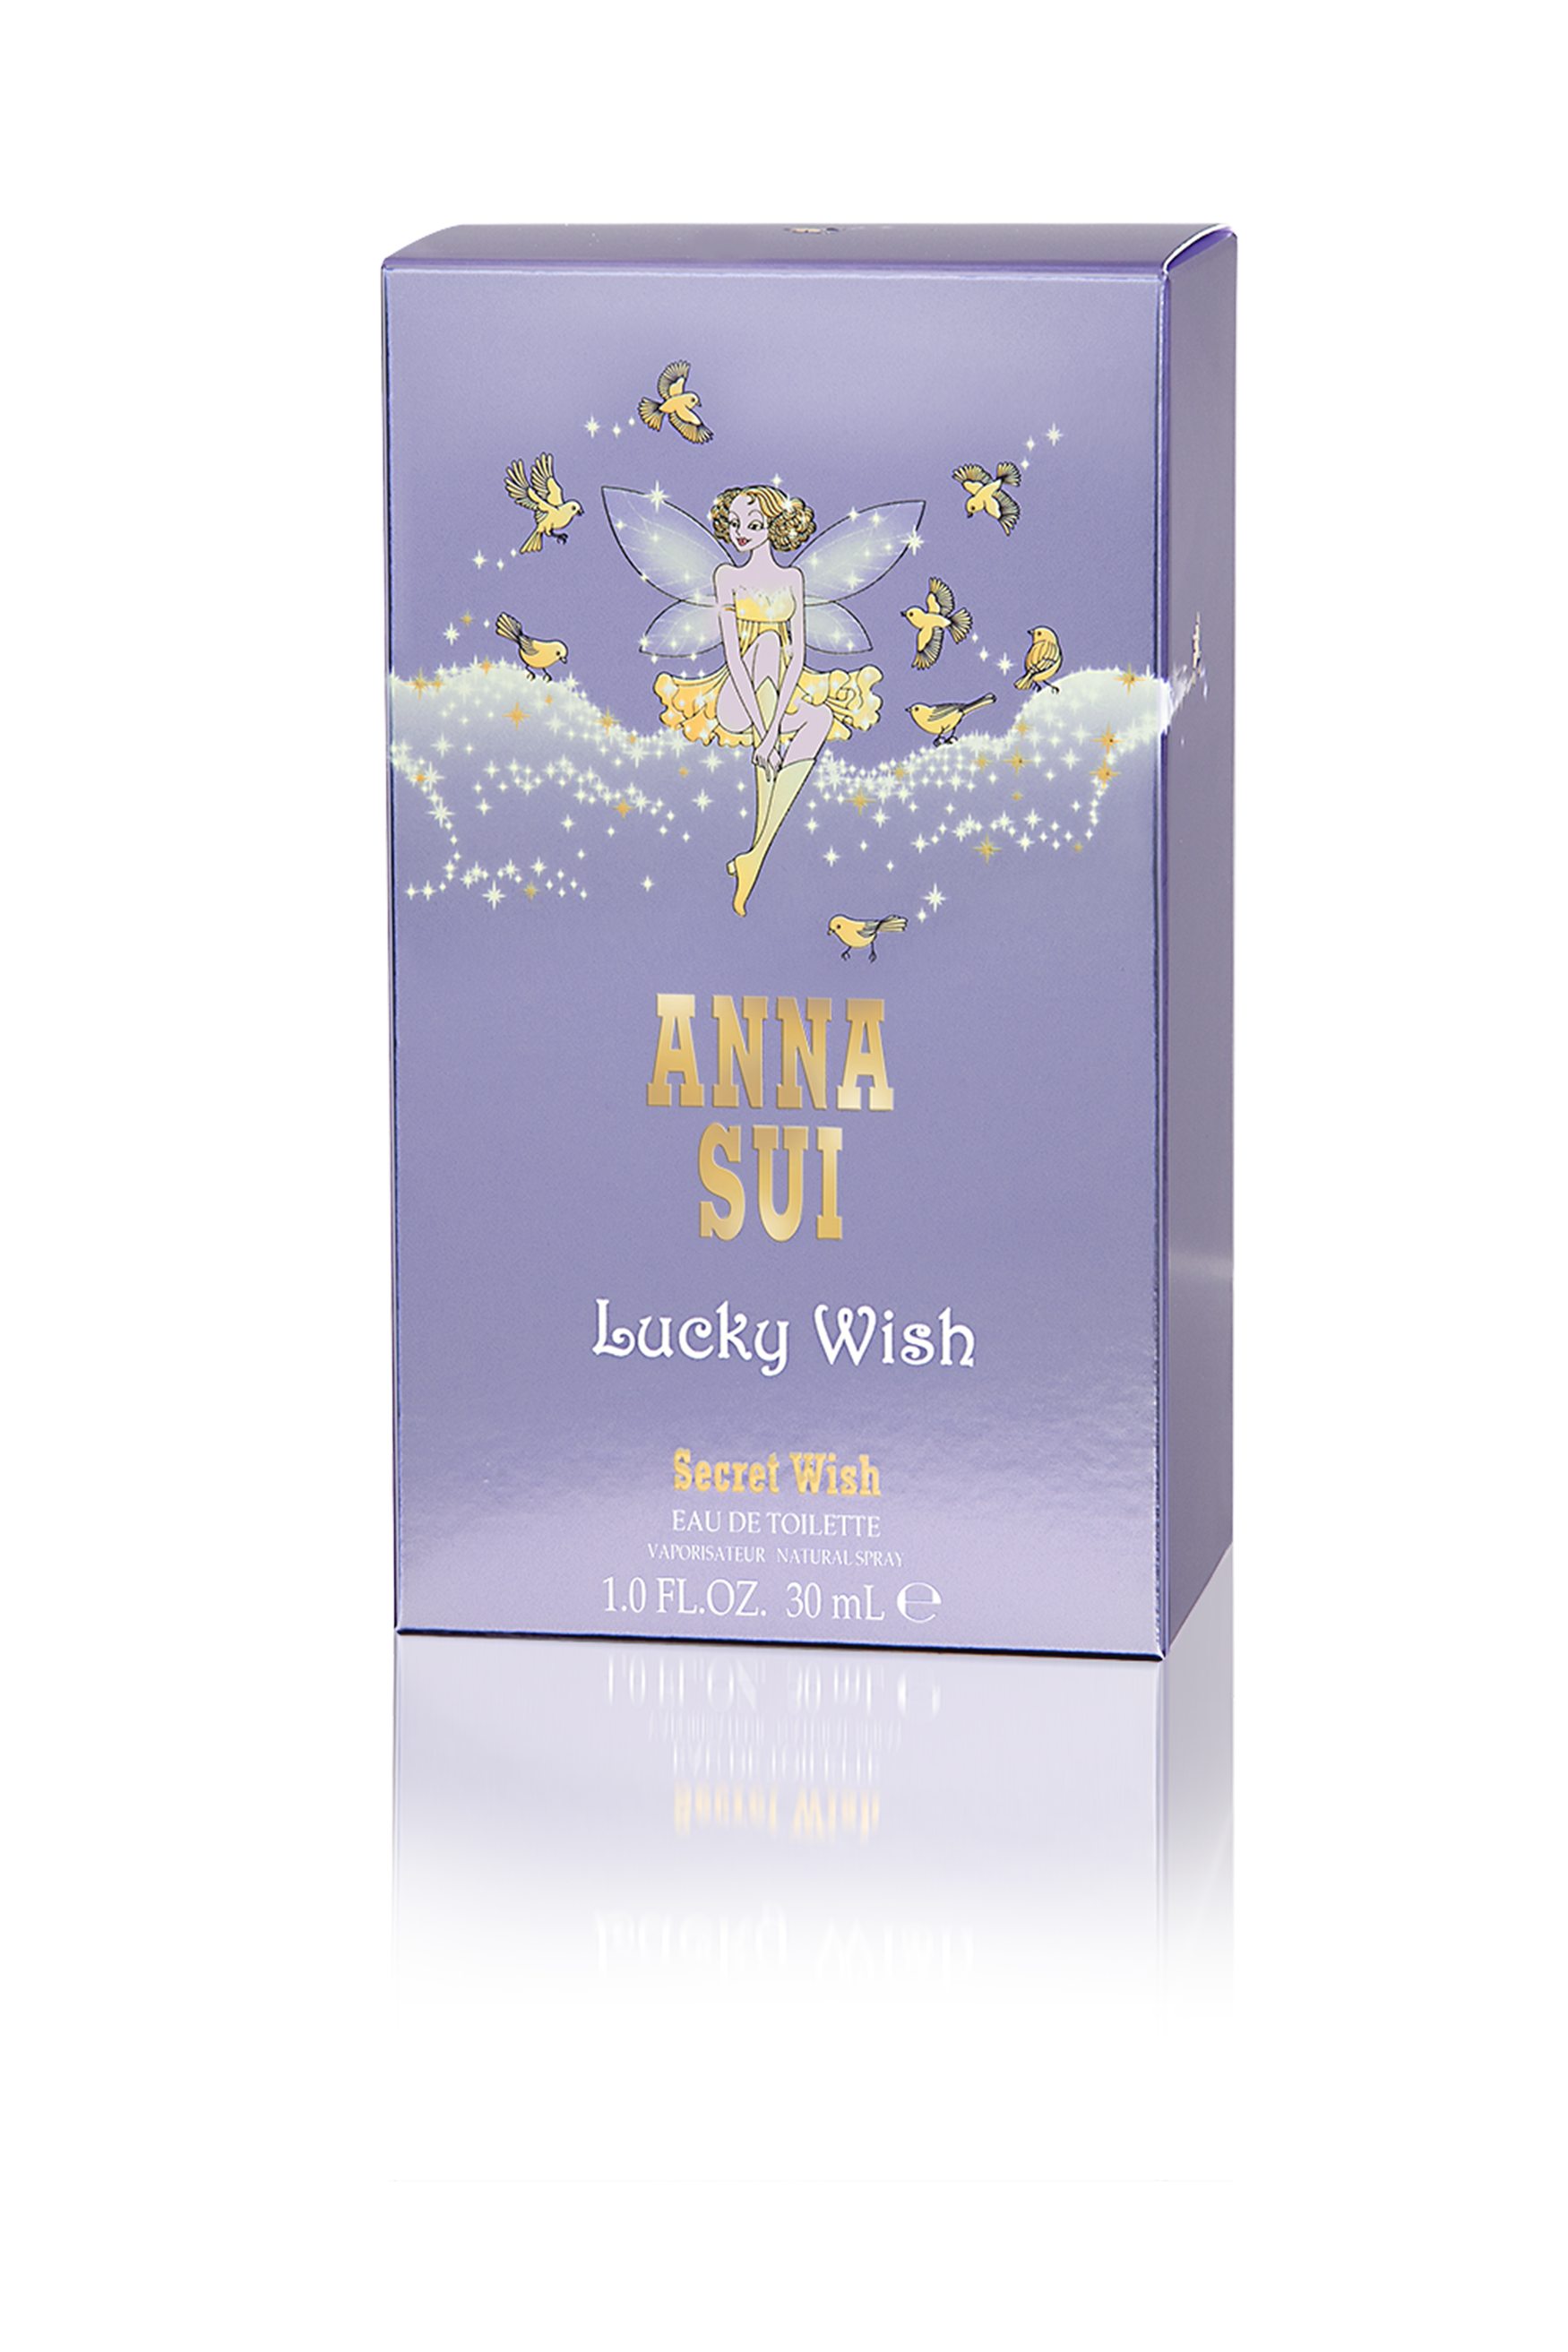 Purple box features an angel on a cloud with birds and stars, Anna Sui label, quantity at the bottom